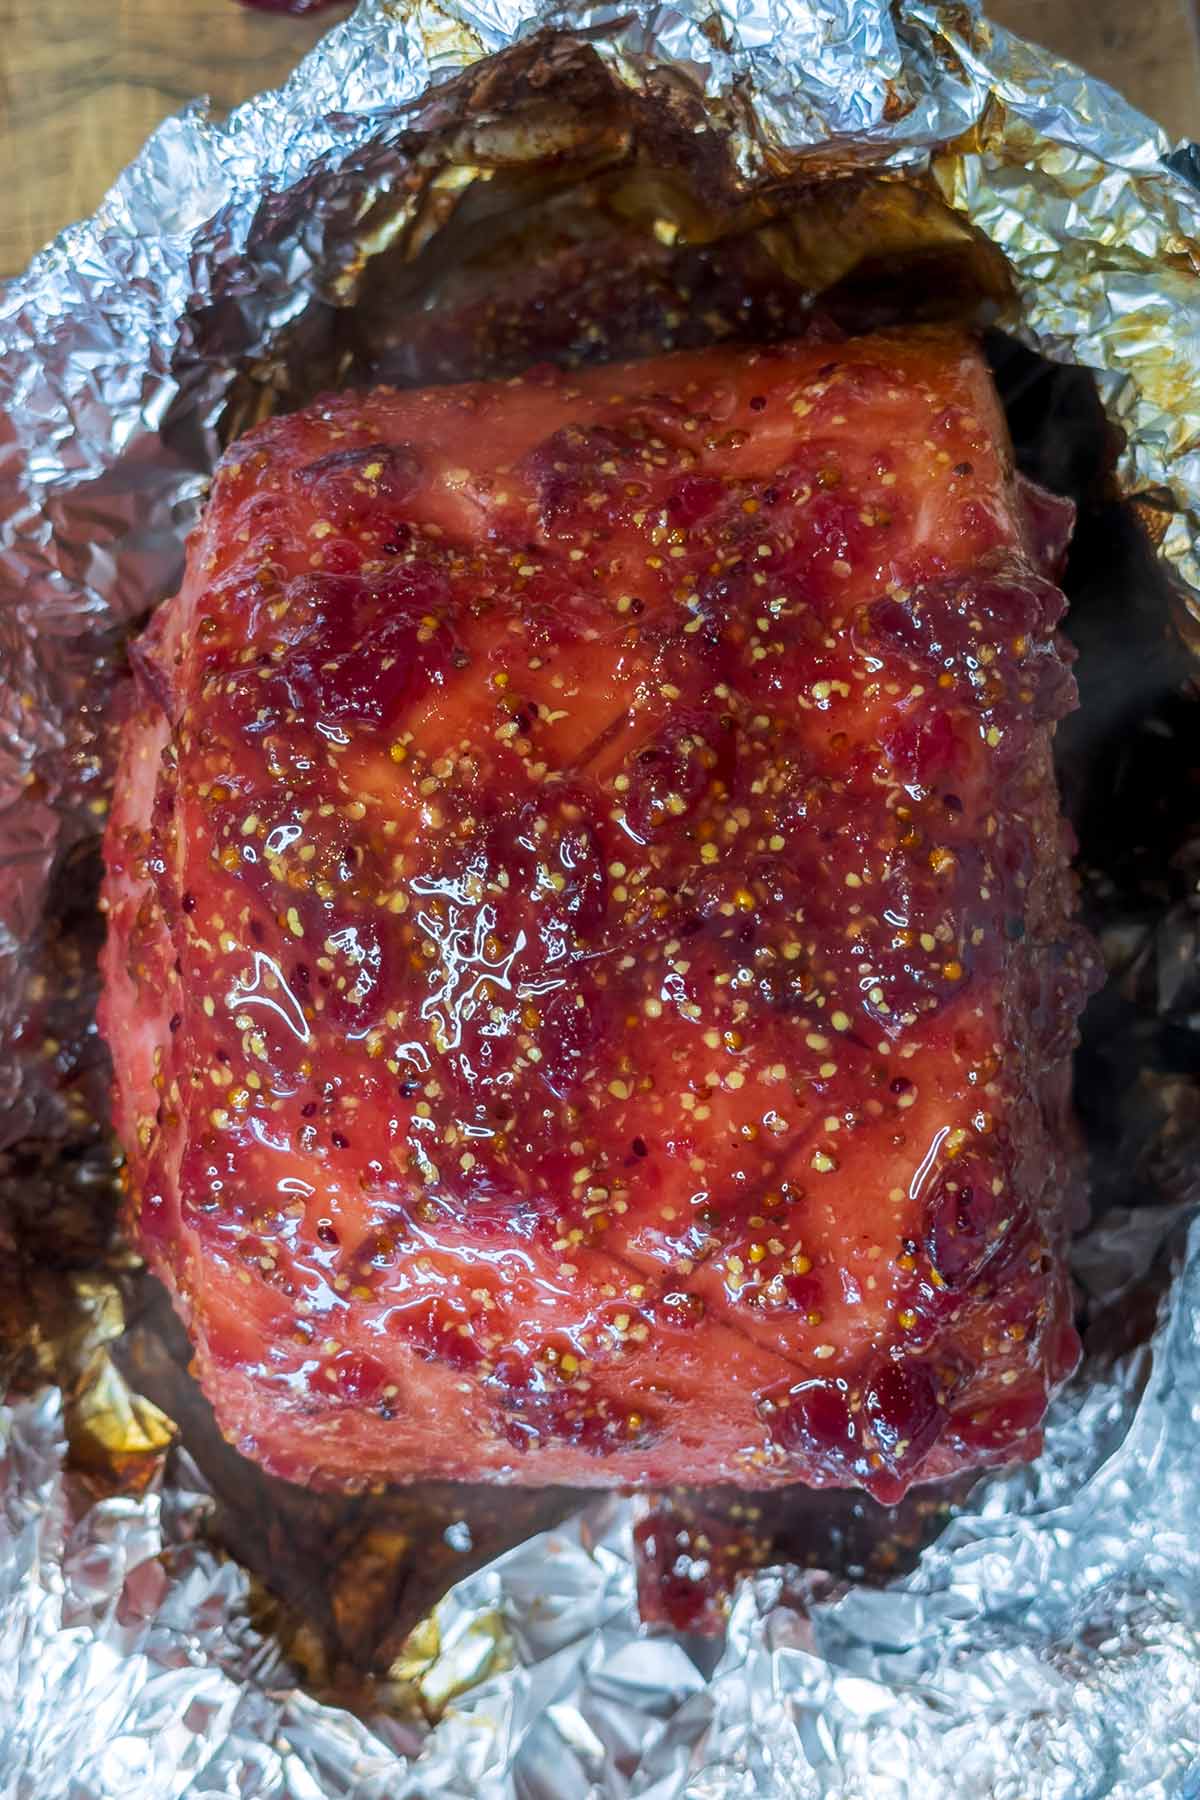 Cranberry glaze on top of the scored gammon.